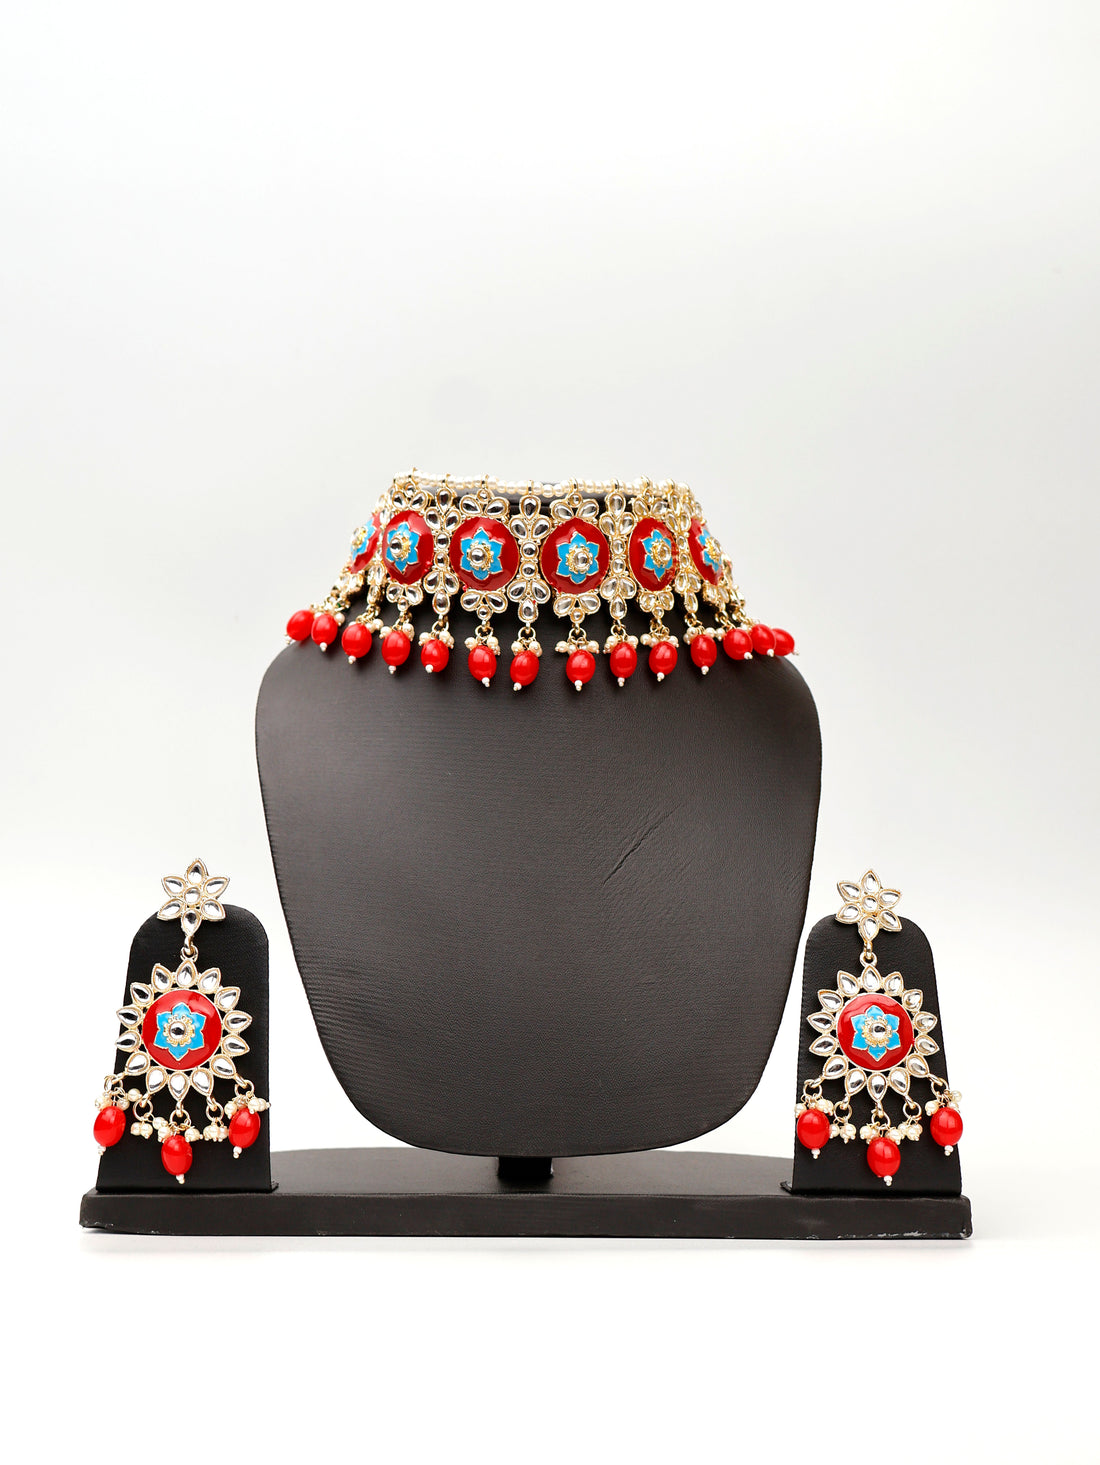 Multicolor Kundan and Pearl Choker Style Necklace Set with Earings and Mang Tikka Fashion Jewelry for Party Festival Wedding Occasion in Noida